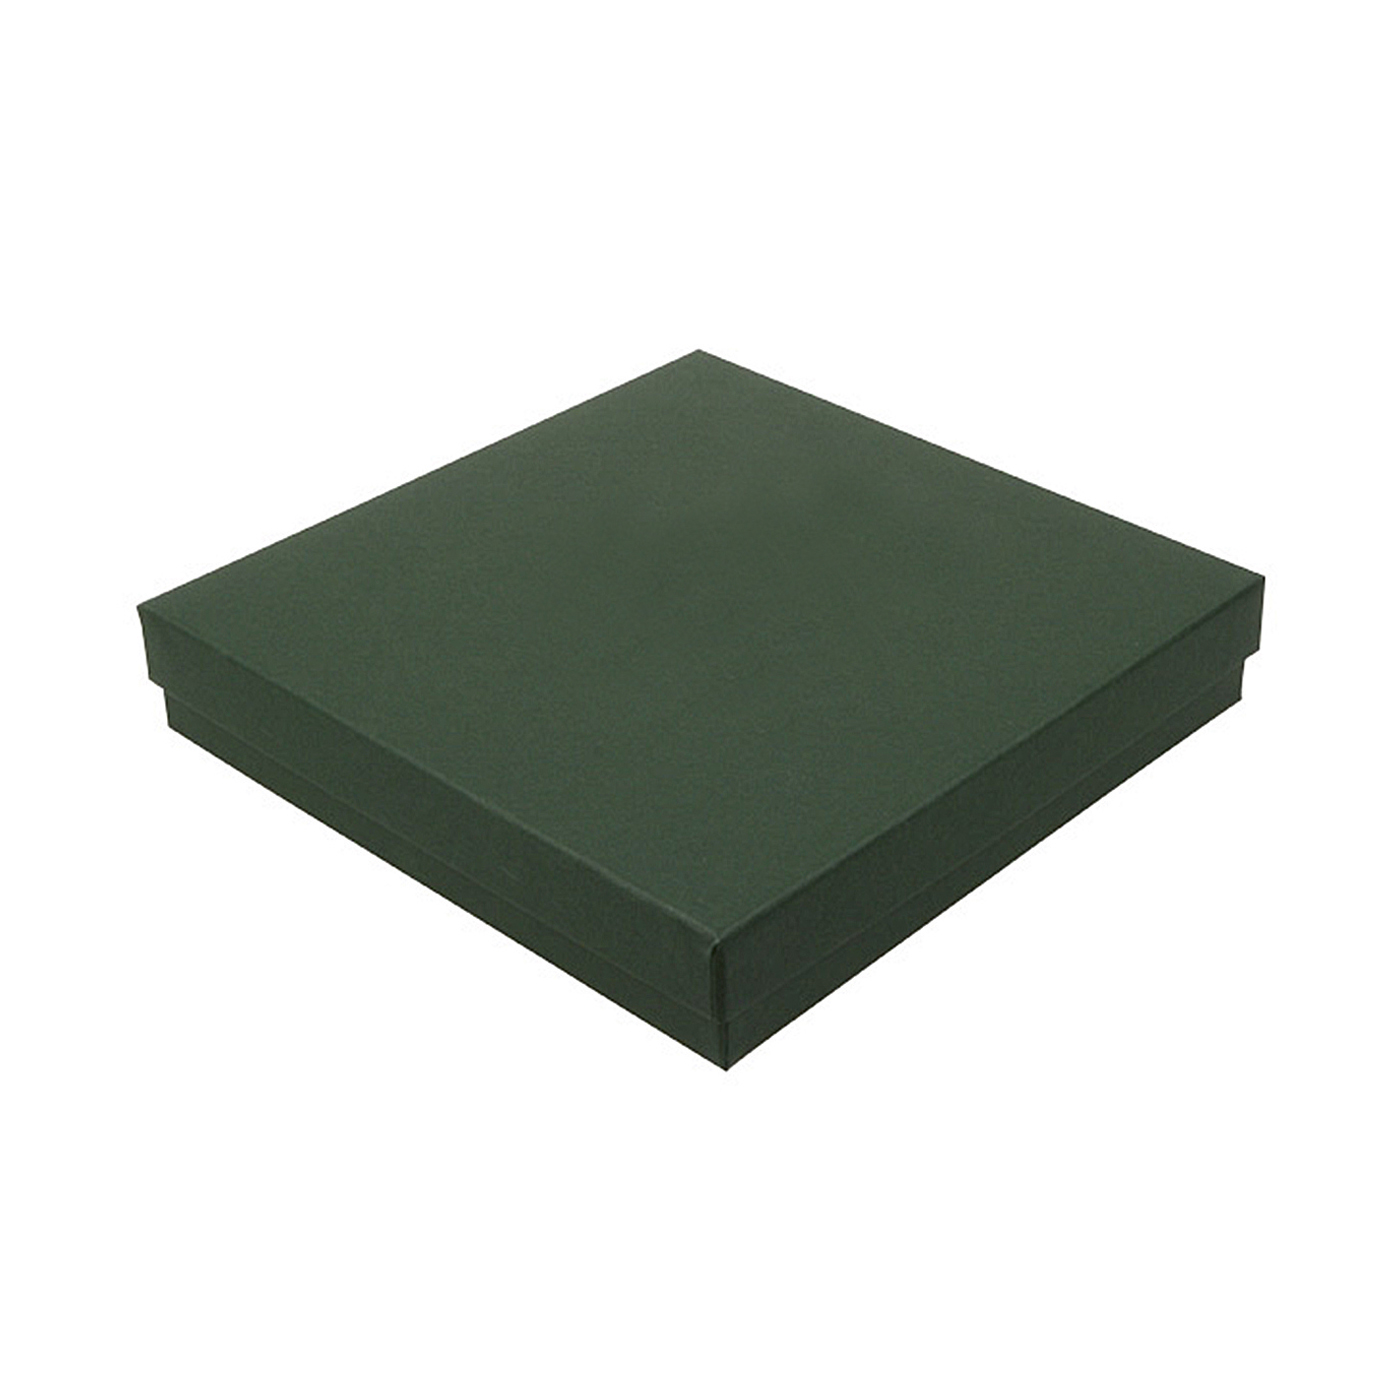 Jewellery Packaging "Eco", Green, 167 x 167 x 32 mm - 1 piece